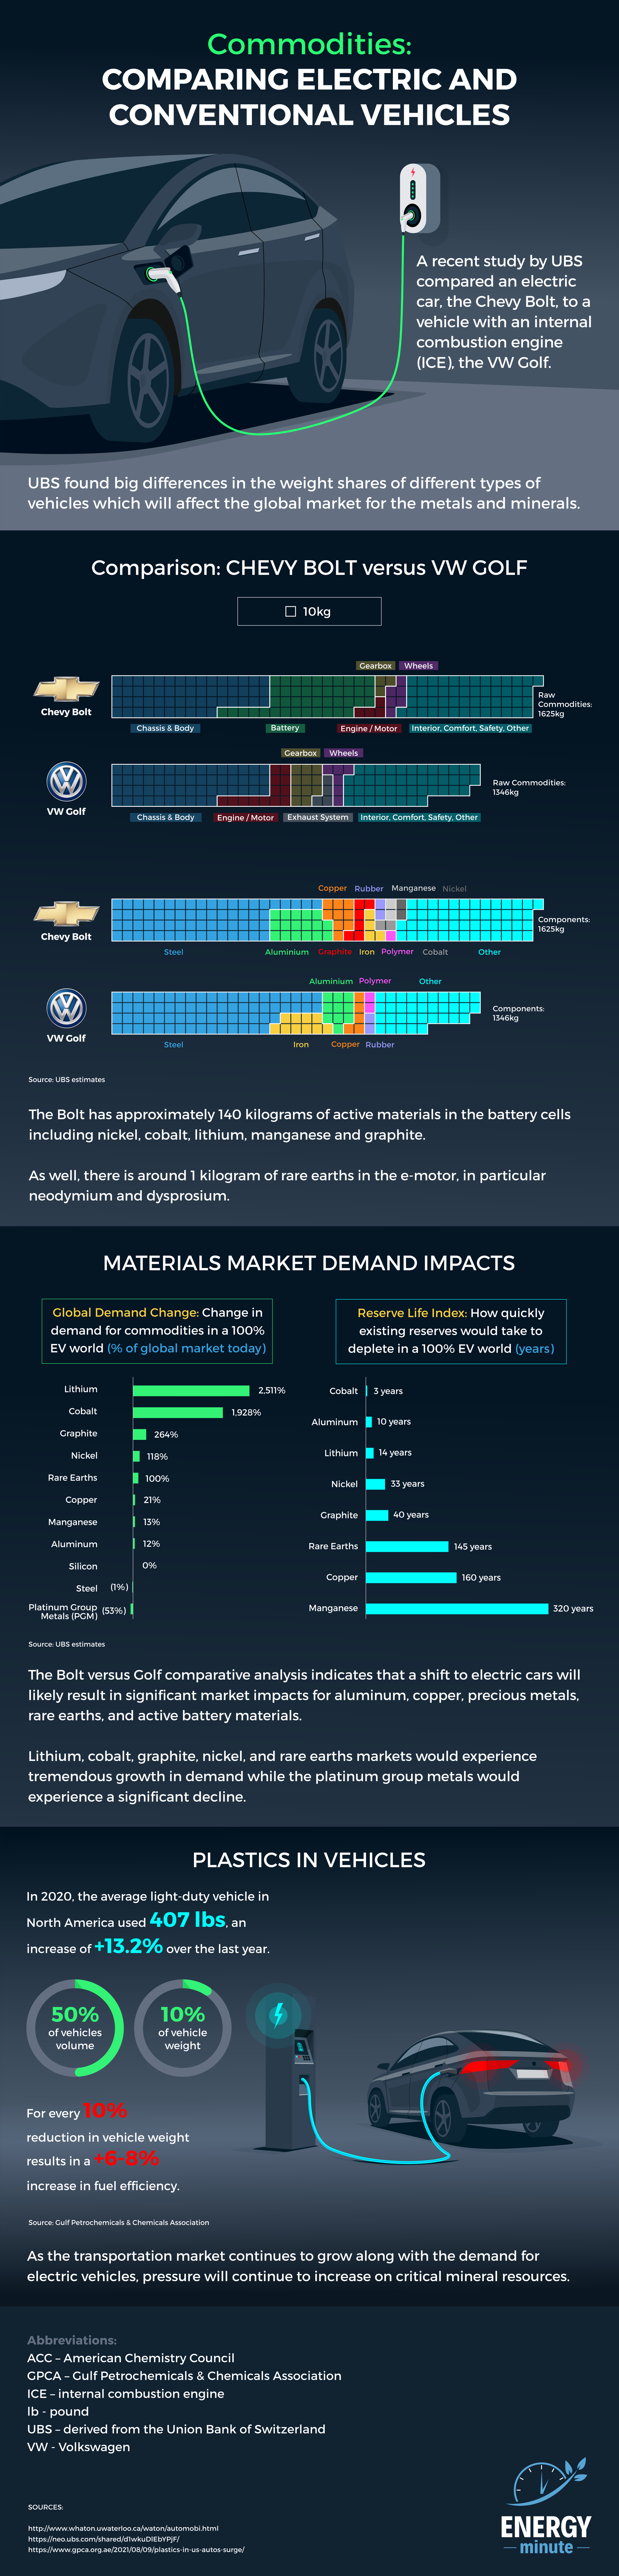 Comparing the Material Makeup of EVs vs. Conventional Cars